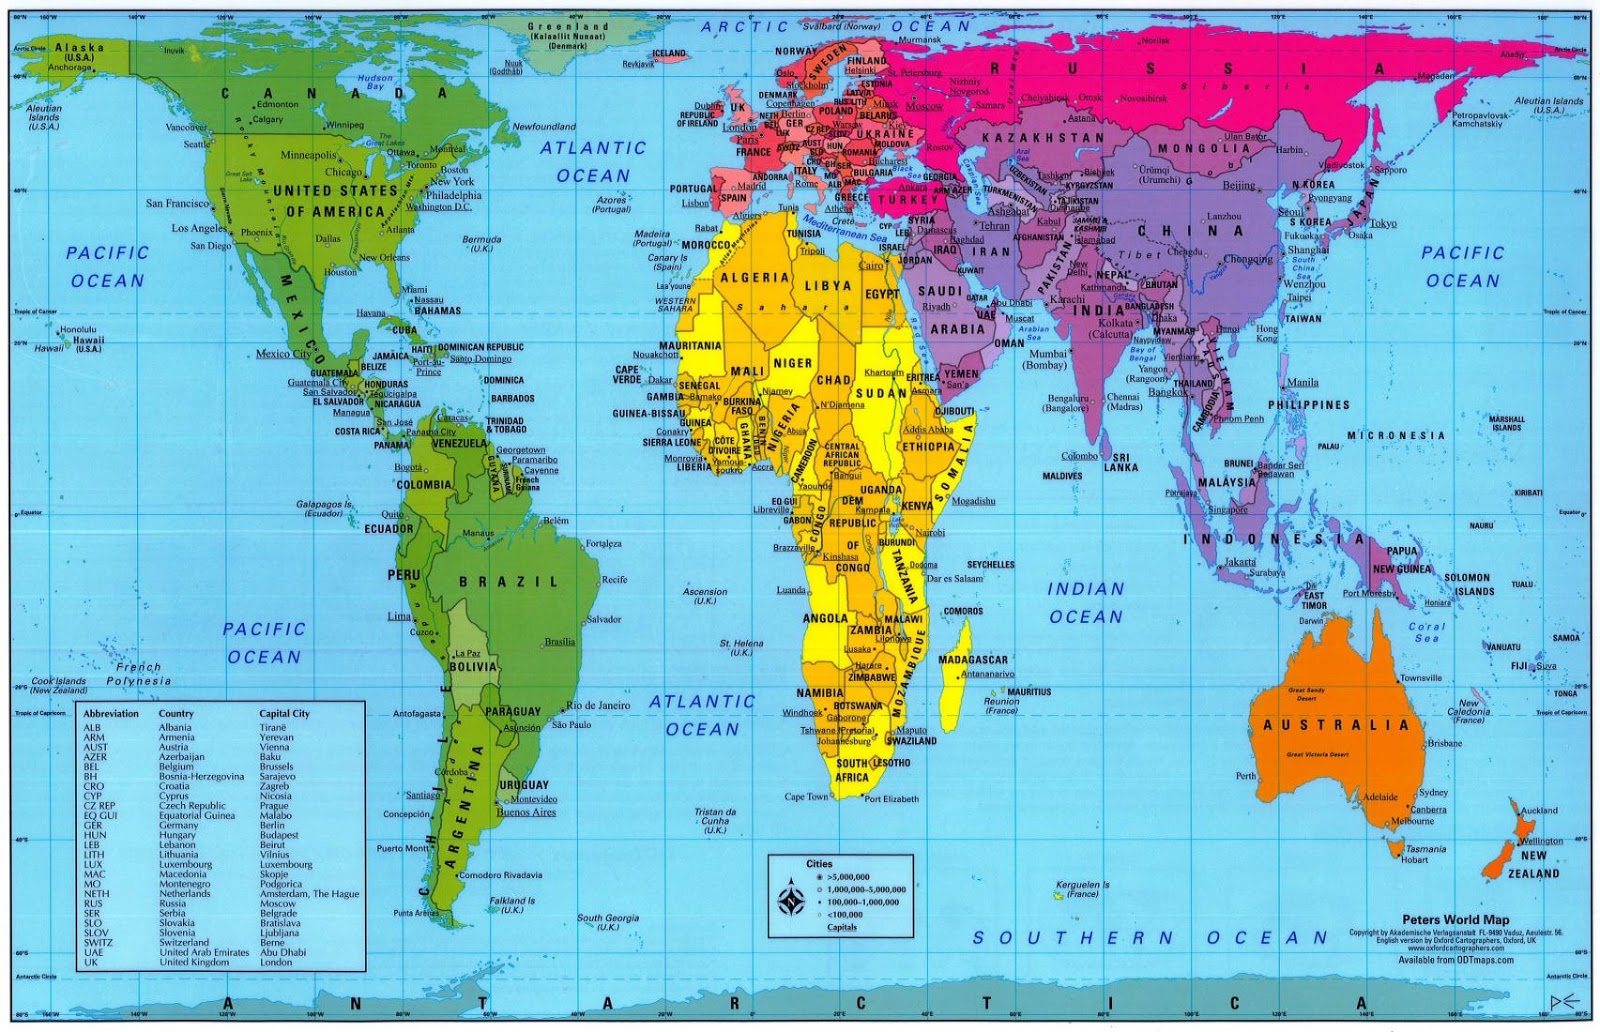 Cont: from the Peter's projection map: depicting relative sizes ...